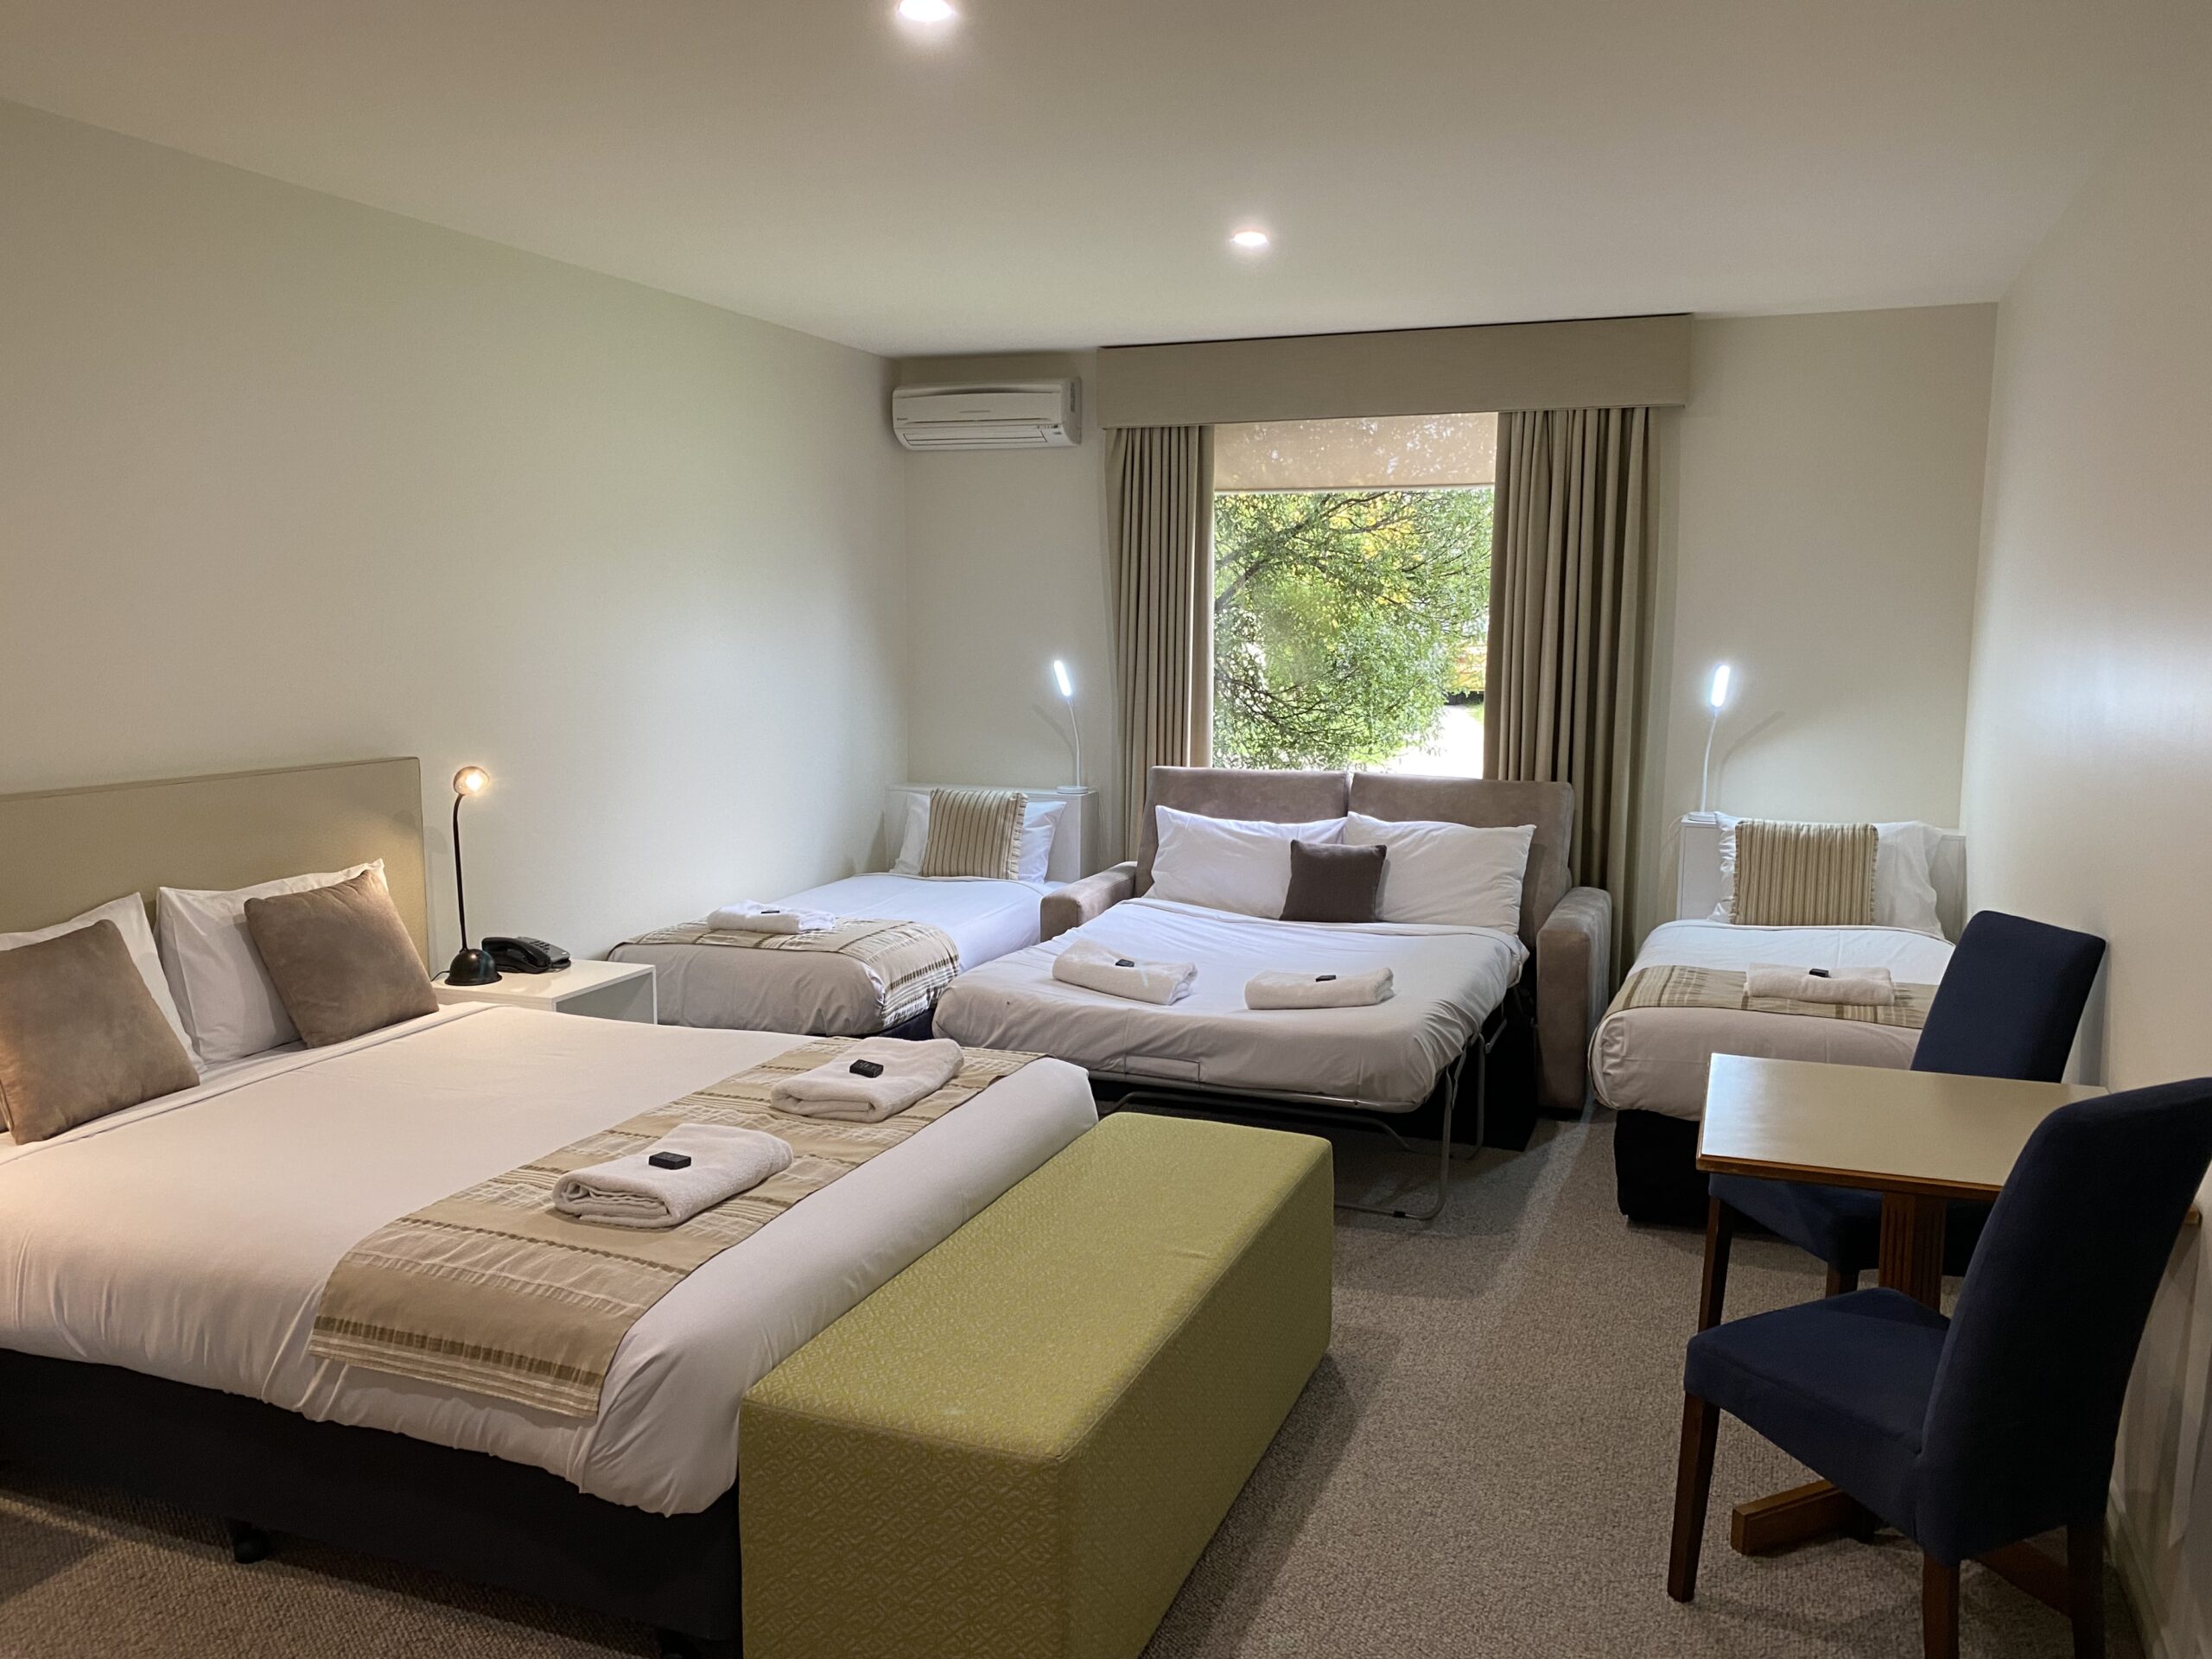 Wheelchair Friendly Family Room contains a queen bed, 2 sinle beds and a double fold out bed. The small kitchenette contains, a fridge, sink, microwave, kettle, toaster, cutlery and crockery.